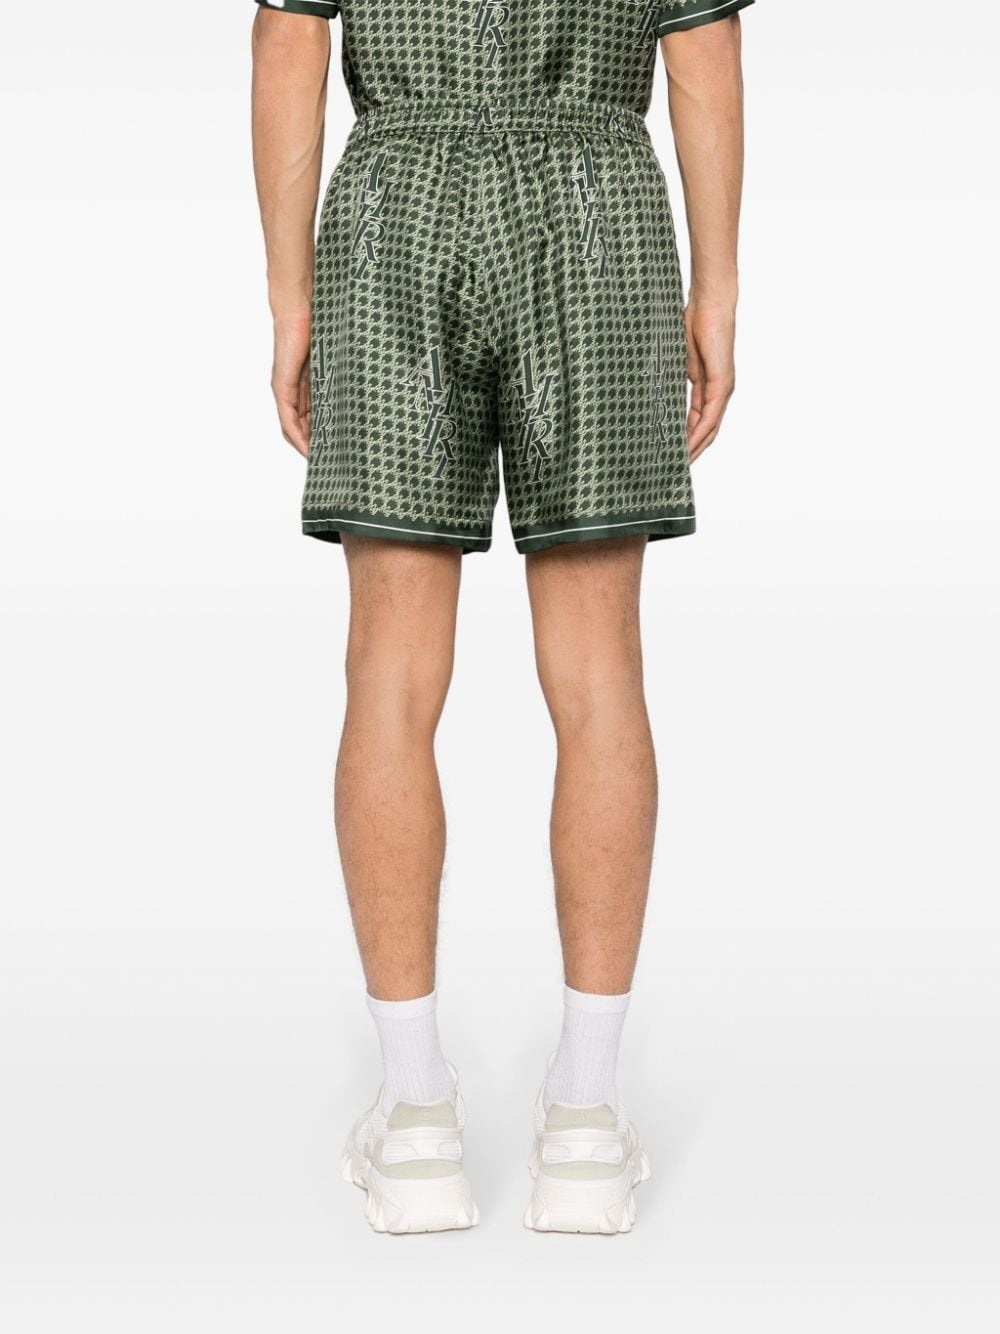 Staggered Houndstooth silk shorts - 4